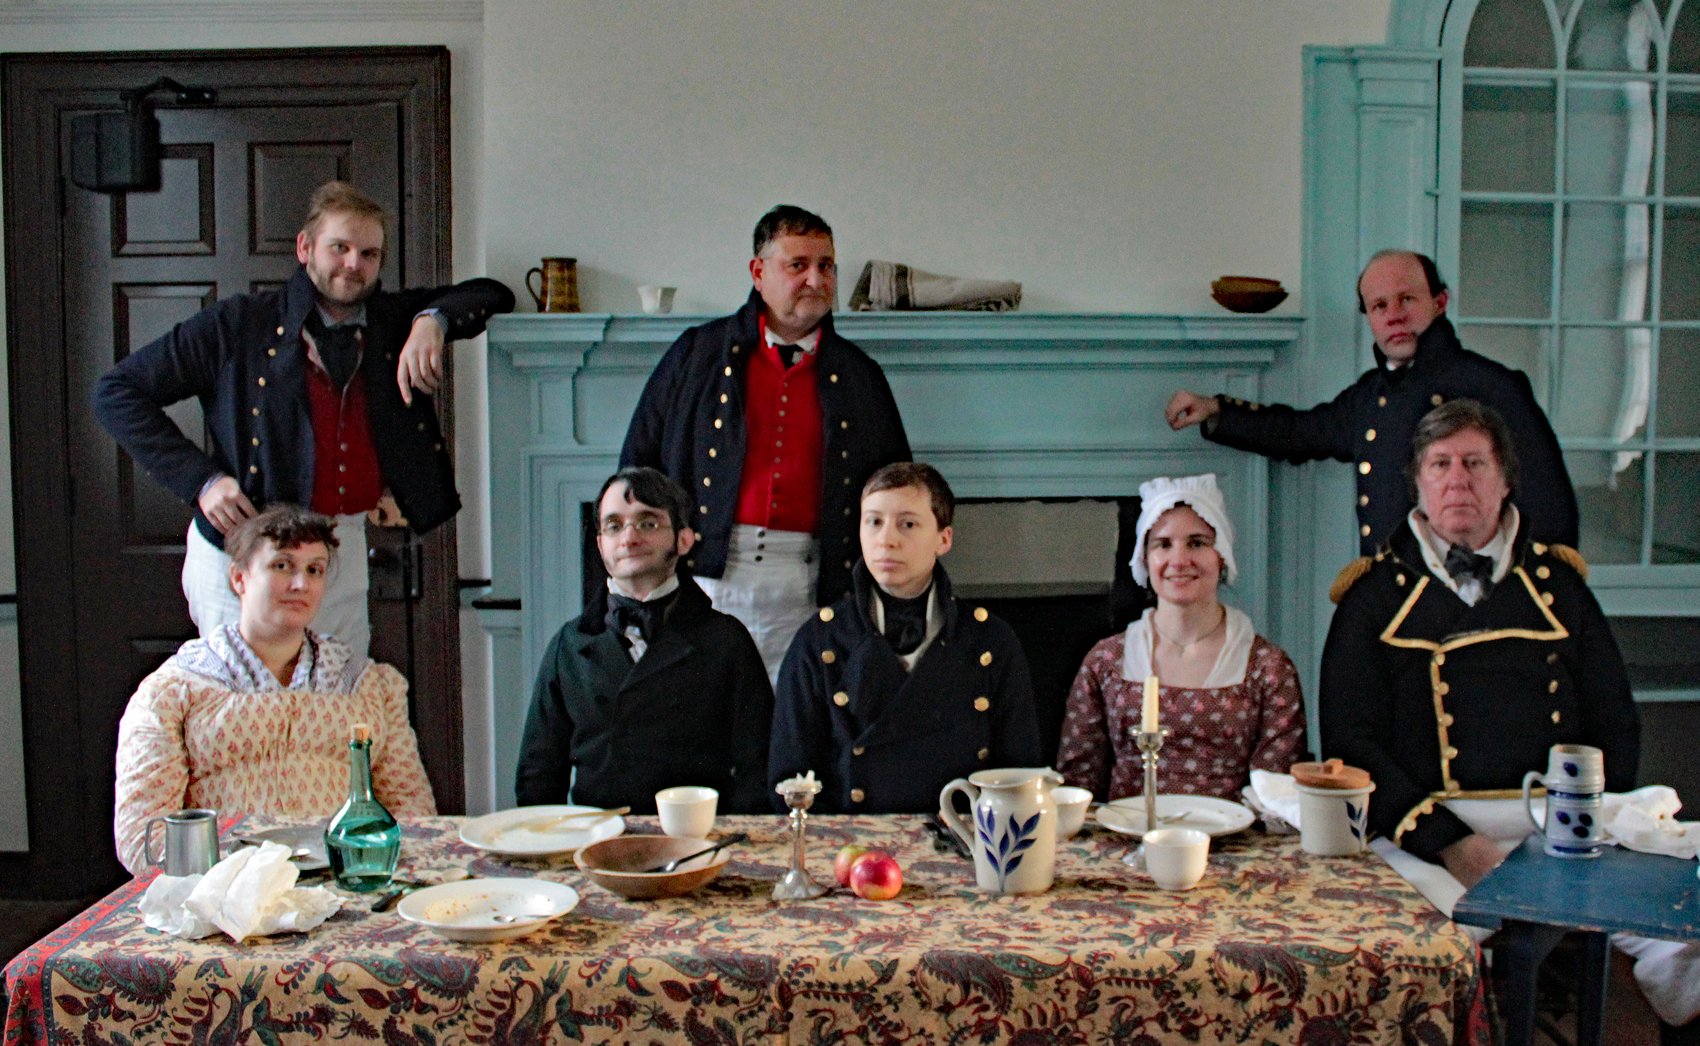 A Ship's Company crew sits around a dinner table at a re-enactment